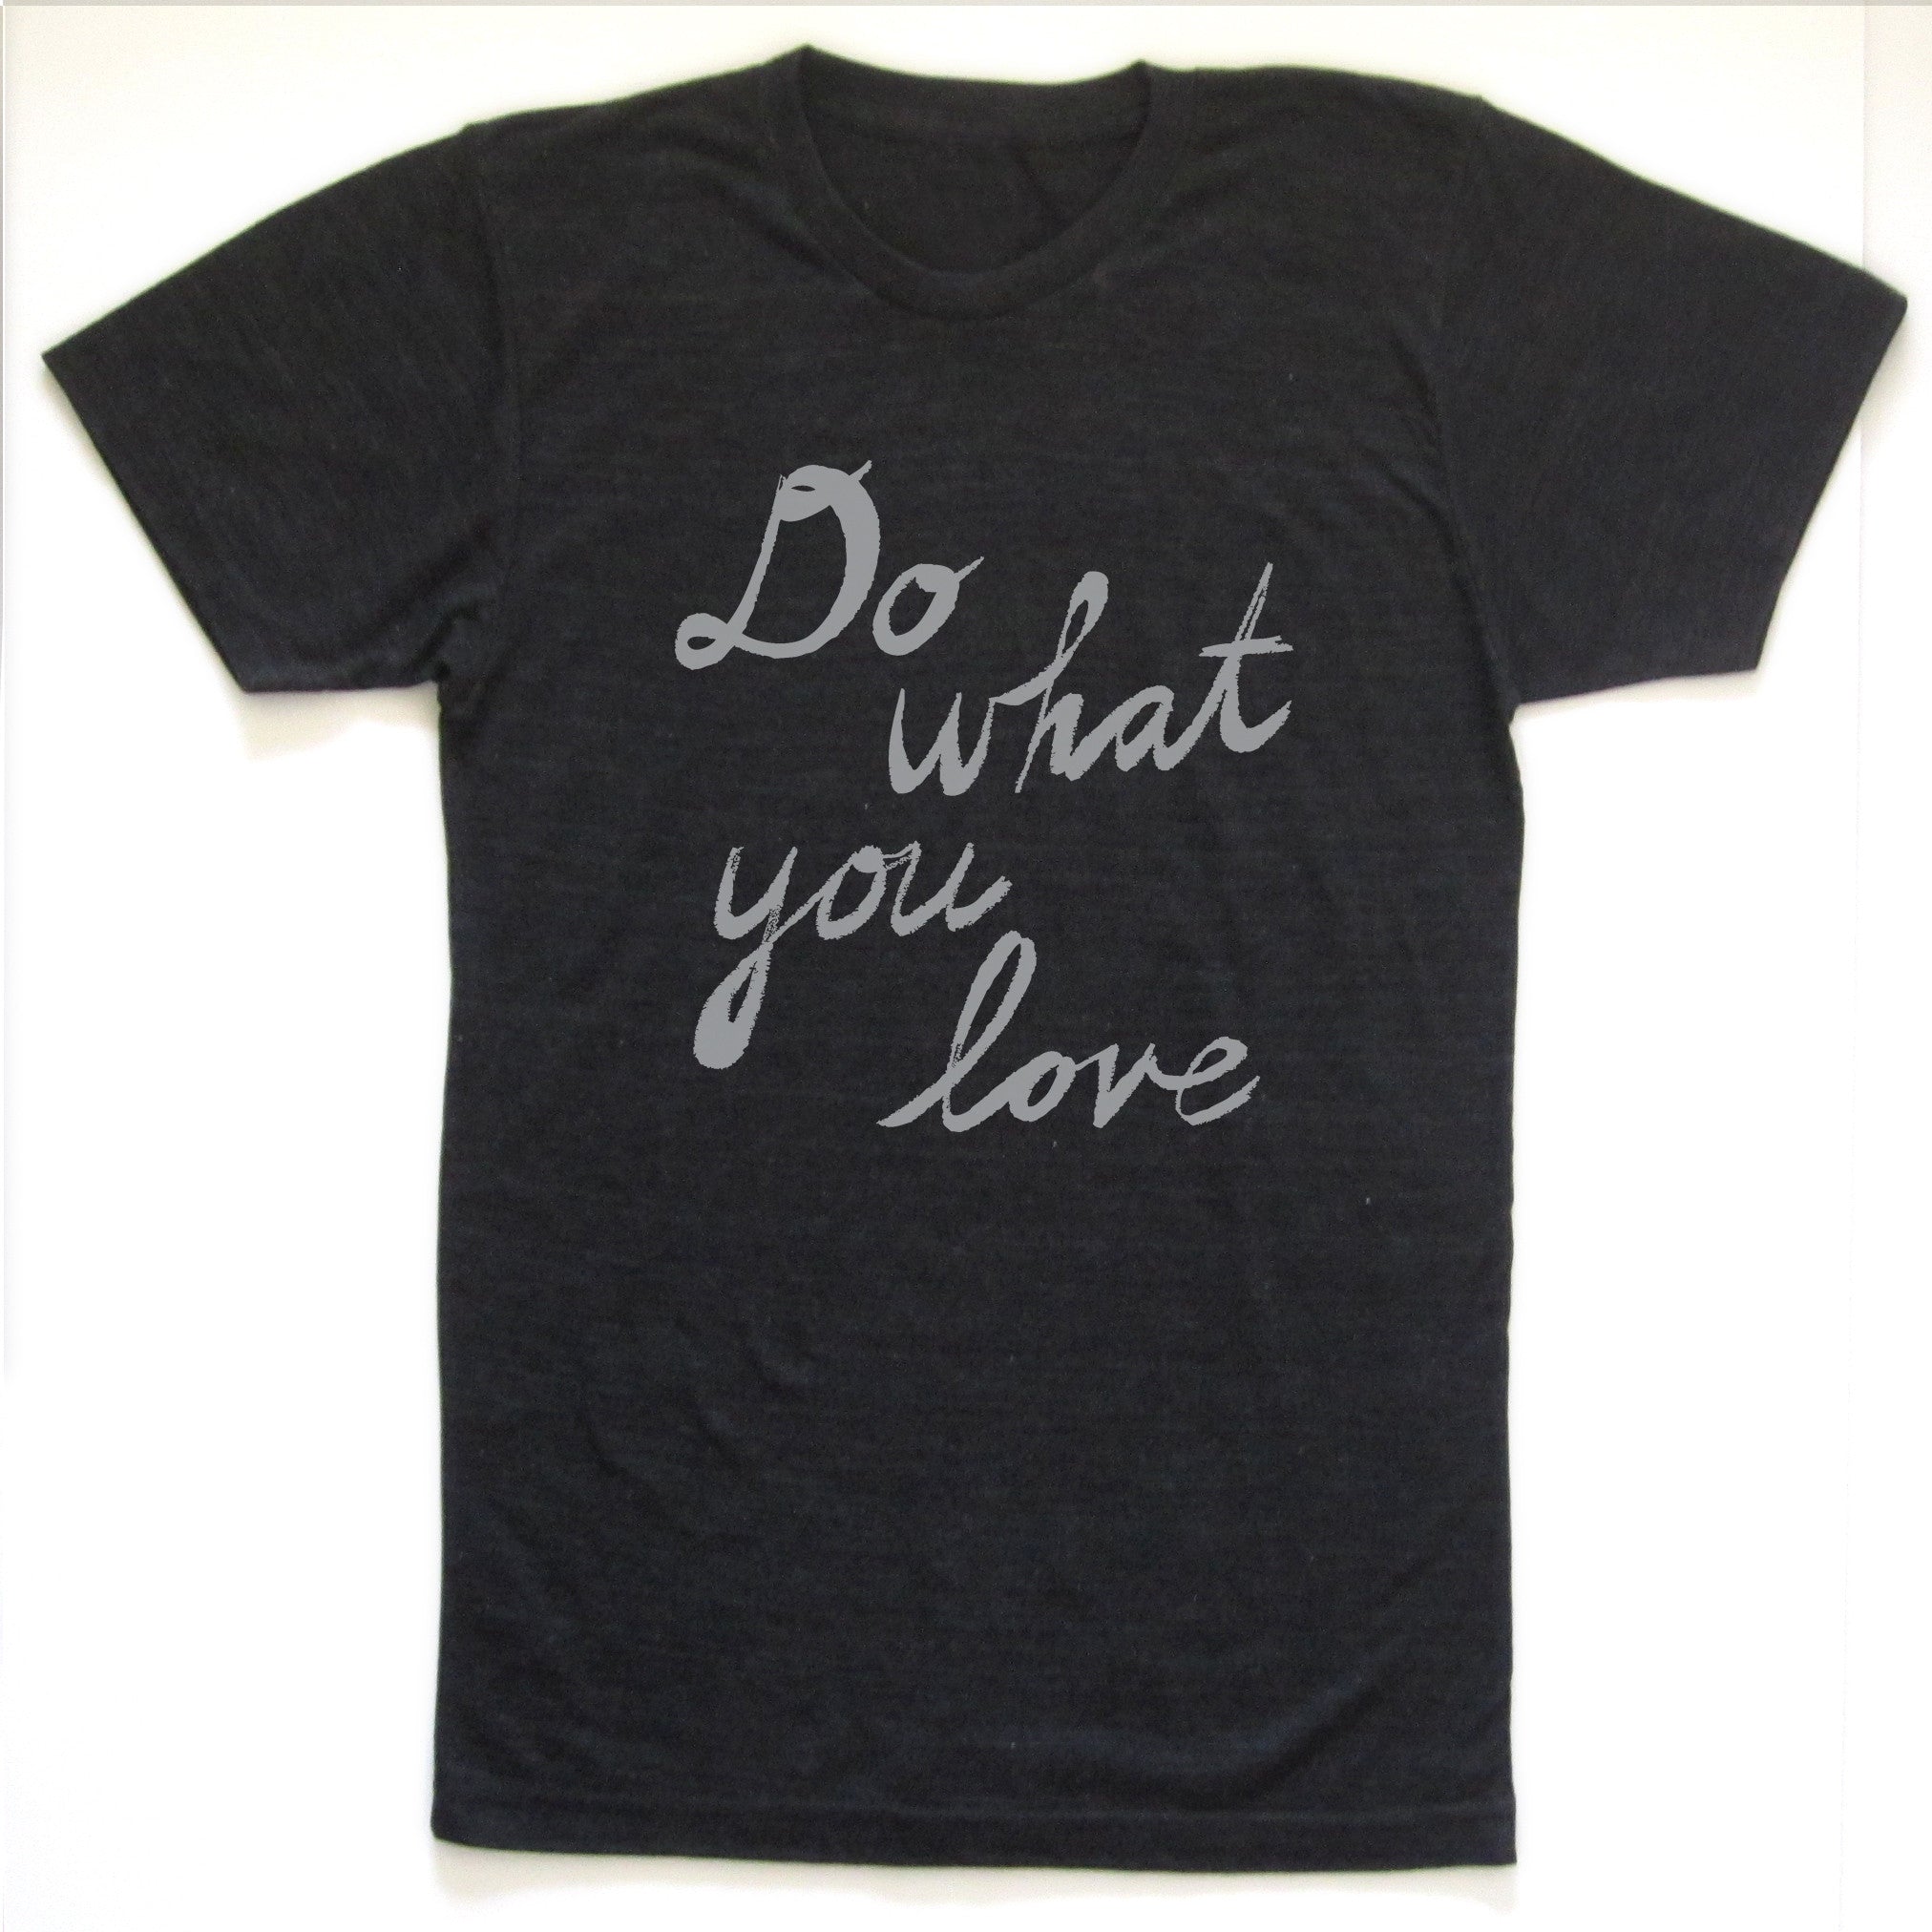 Do what you love : unisex tri-blend tee